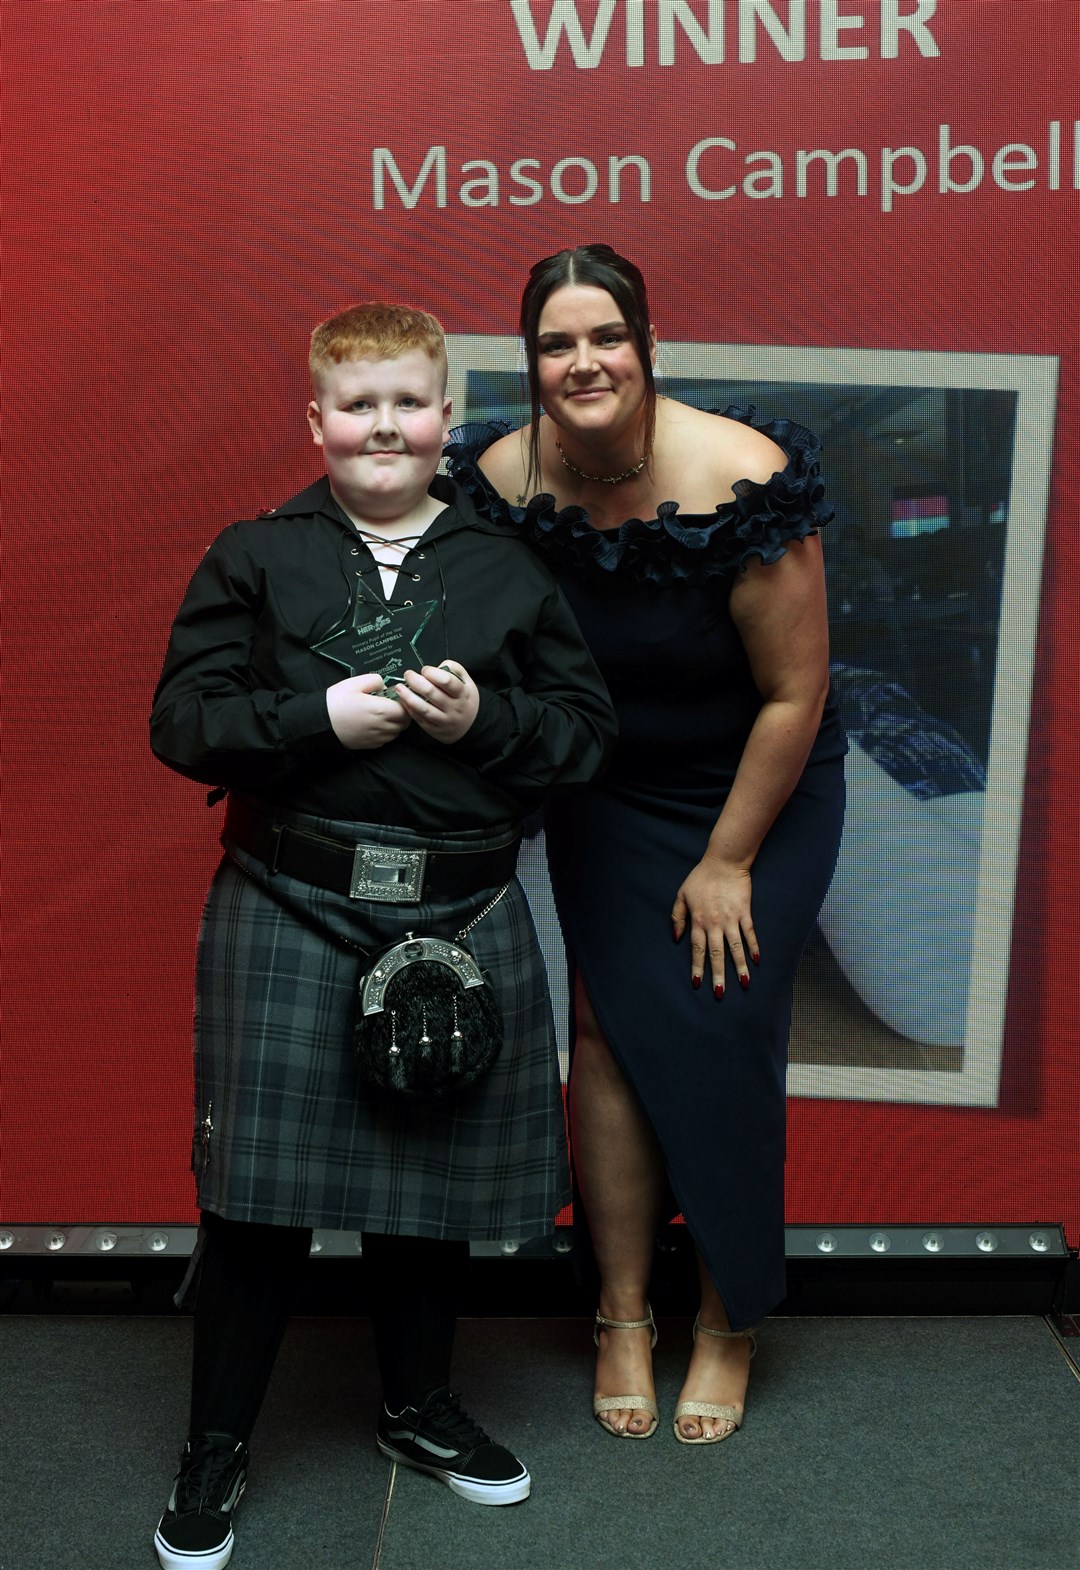 Mason Campbell won the Primary Pupil Award sponsored by Inverness Flooring.